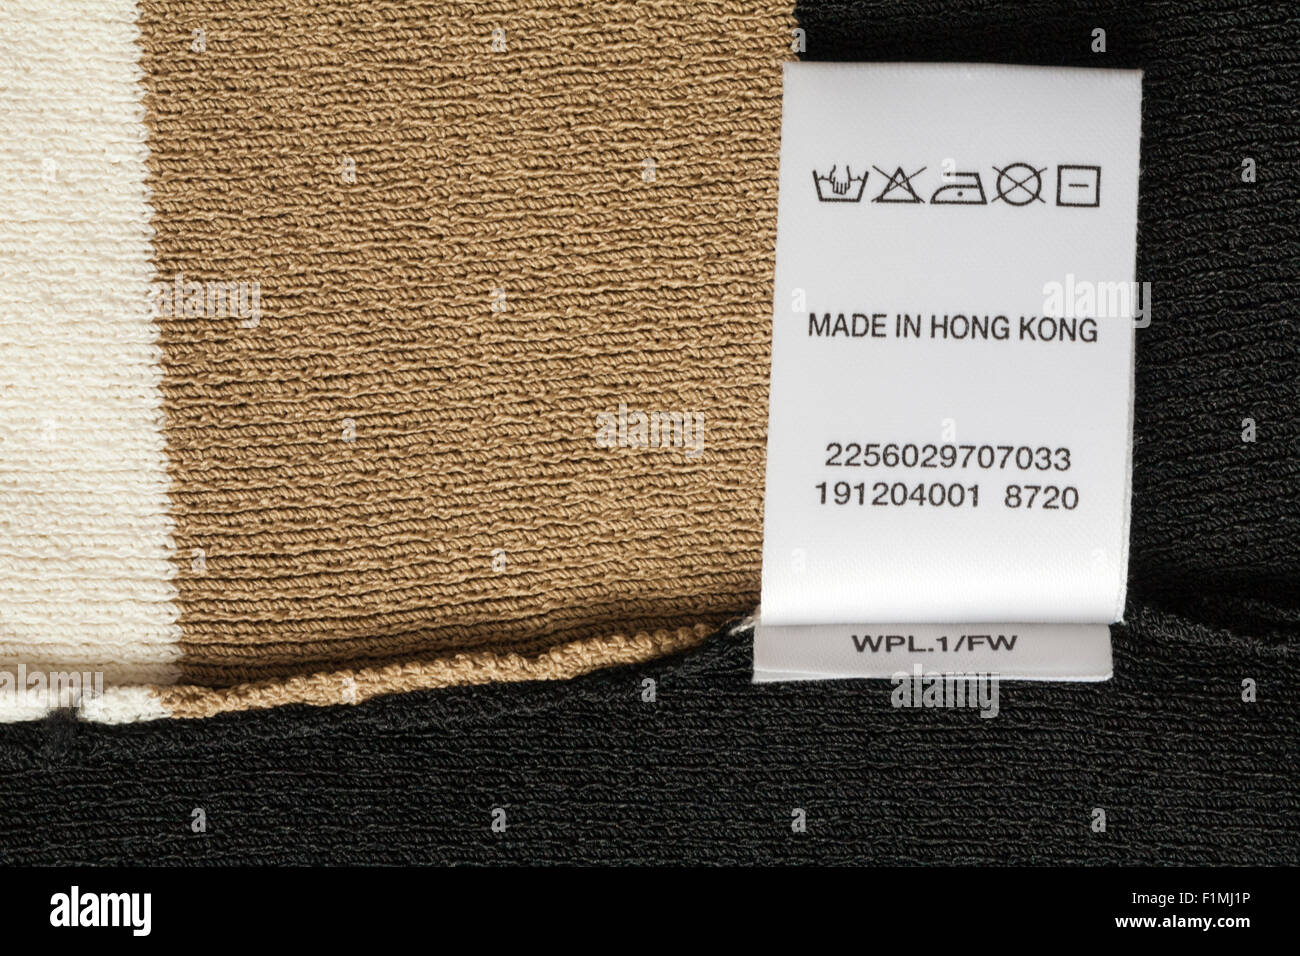 95% cotton 5% spandex label in woman's little black dress with beads made  in Hong Kong with wash care symbols and instructions Stock Photo - Alamy